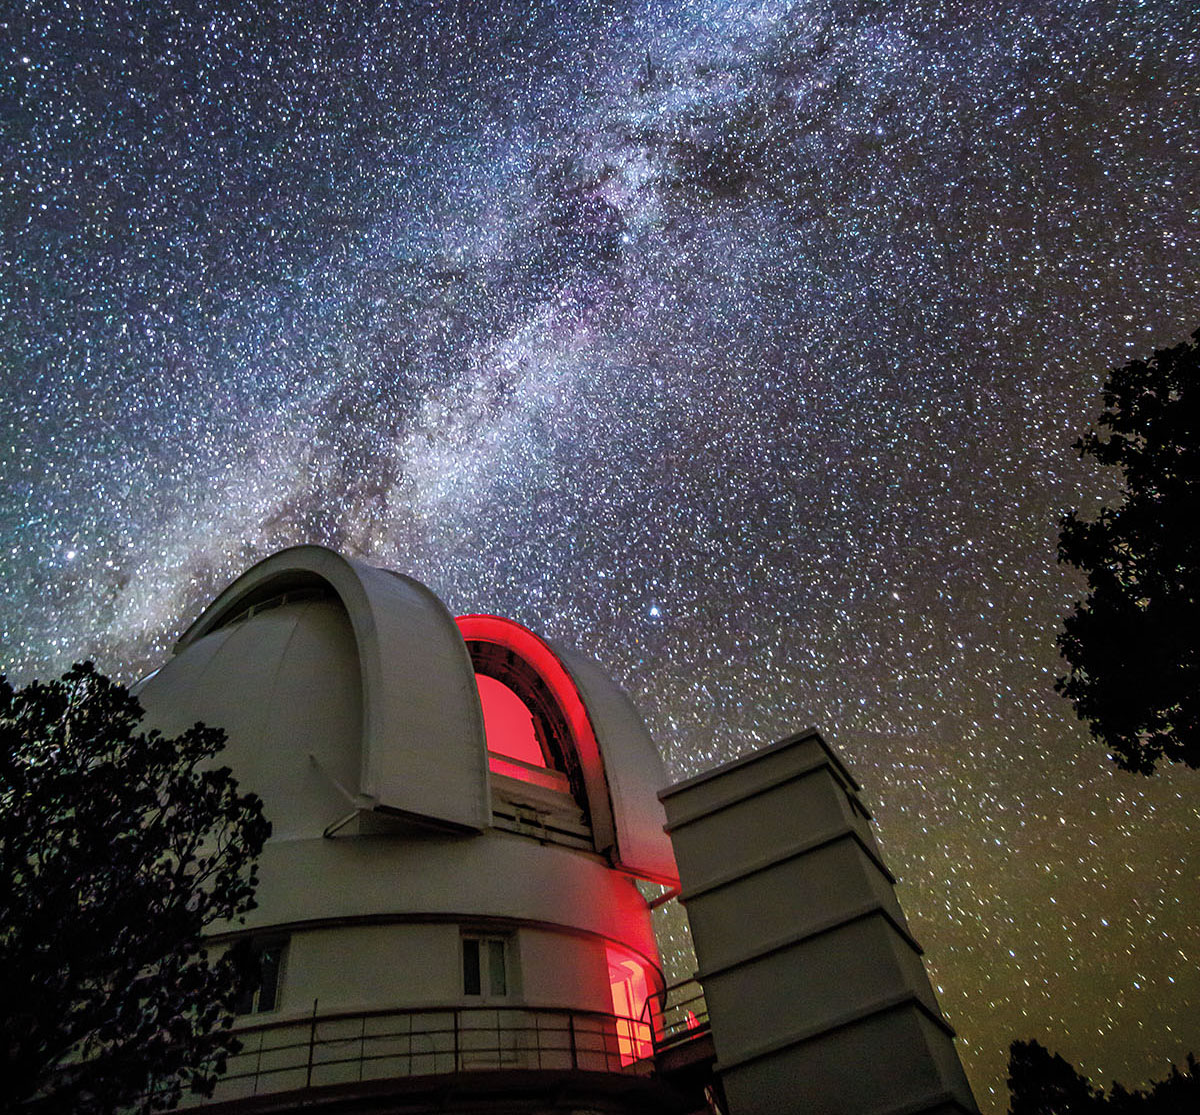 A nighttime photograph of a large white telescope and sky full of stars